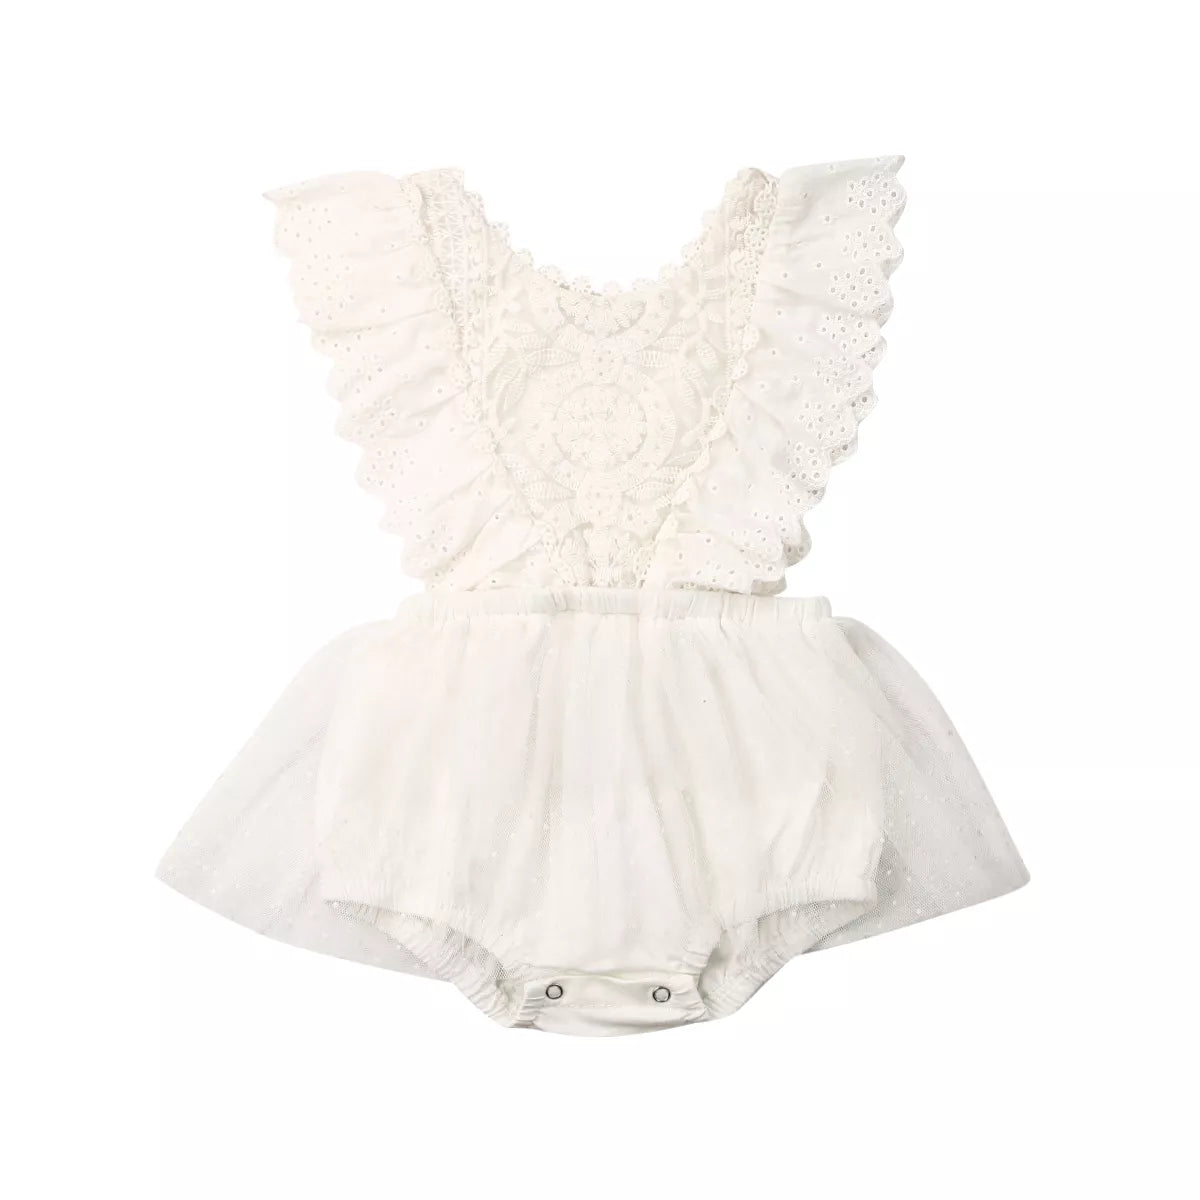 Toddler baby girl romper jumpsuit For Summer With Lace Tutu sleeveless by Baby Minaj Cruz